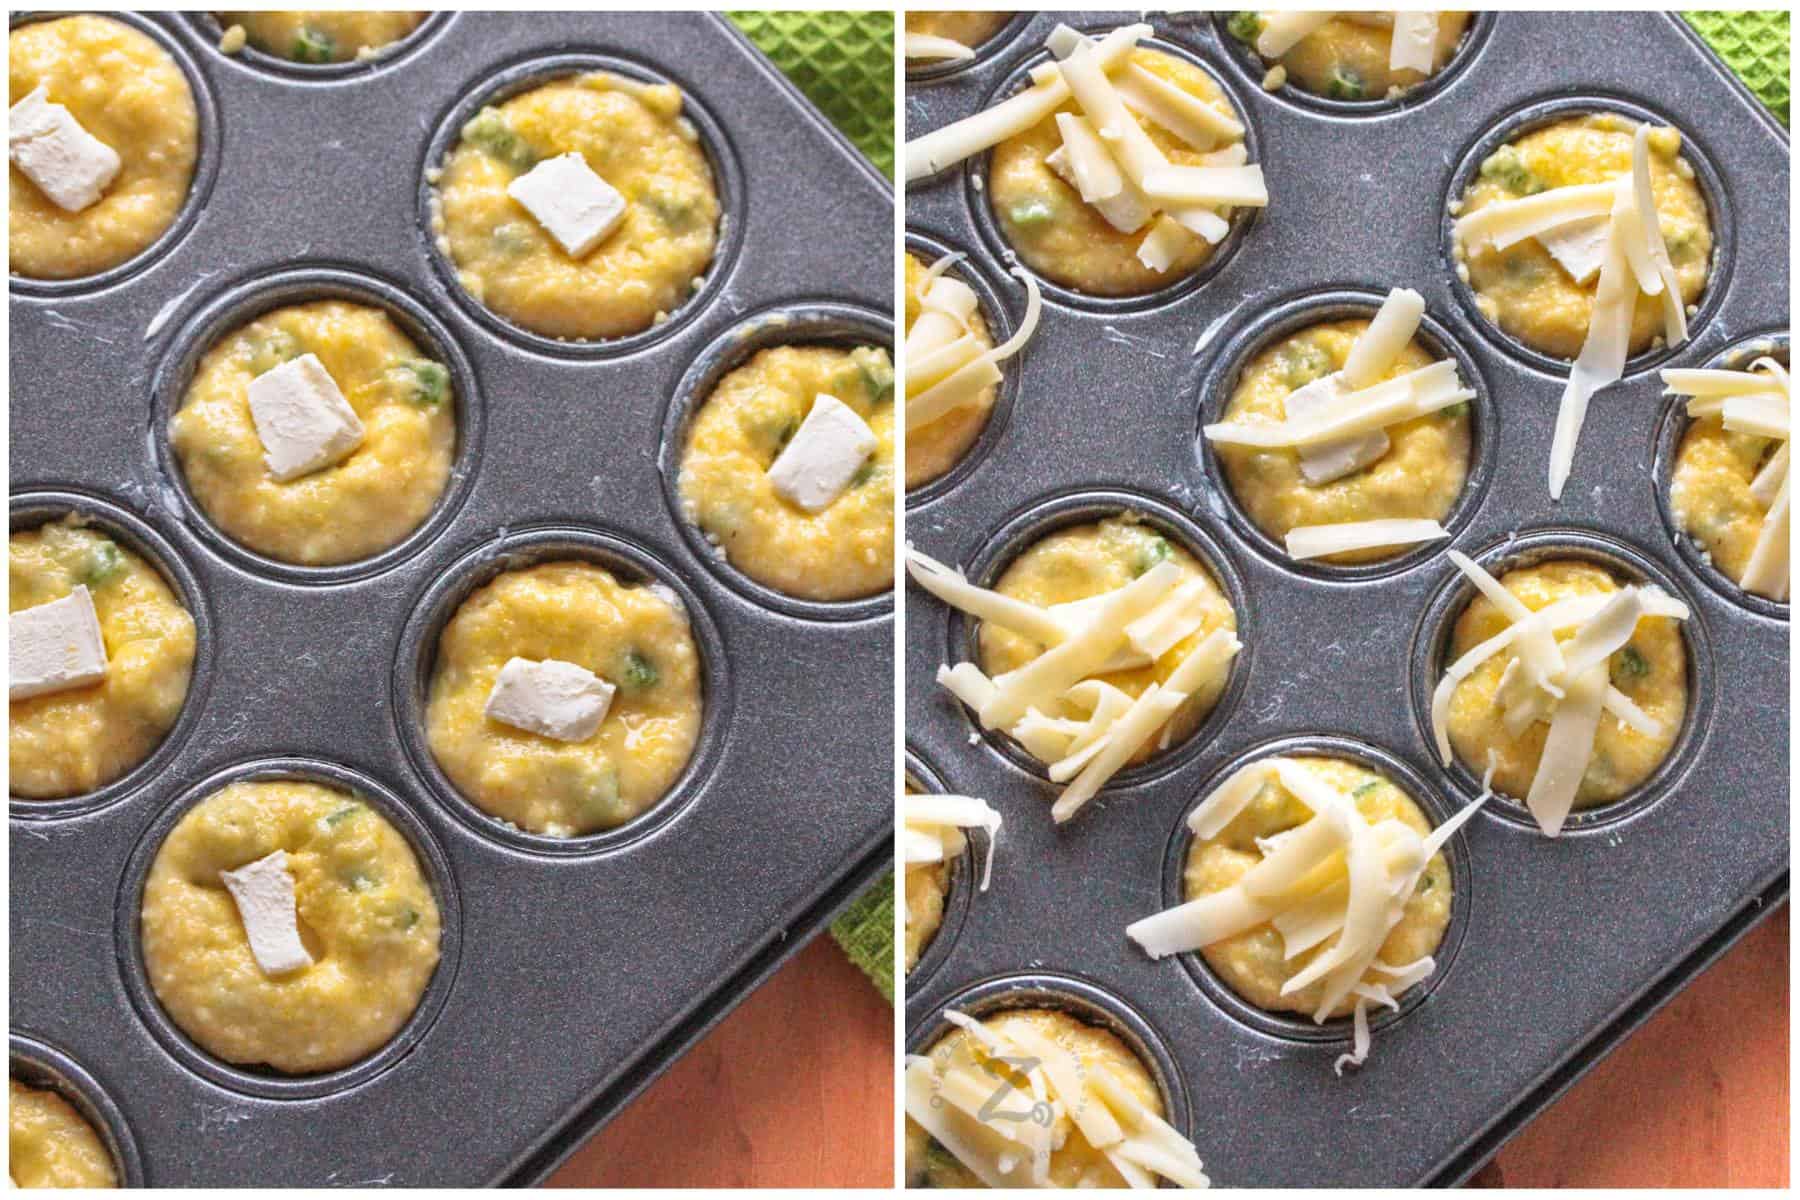 process of adding ingredients to muffin tin to make Jalapeno Cornbread Muffins